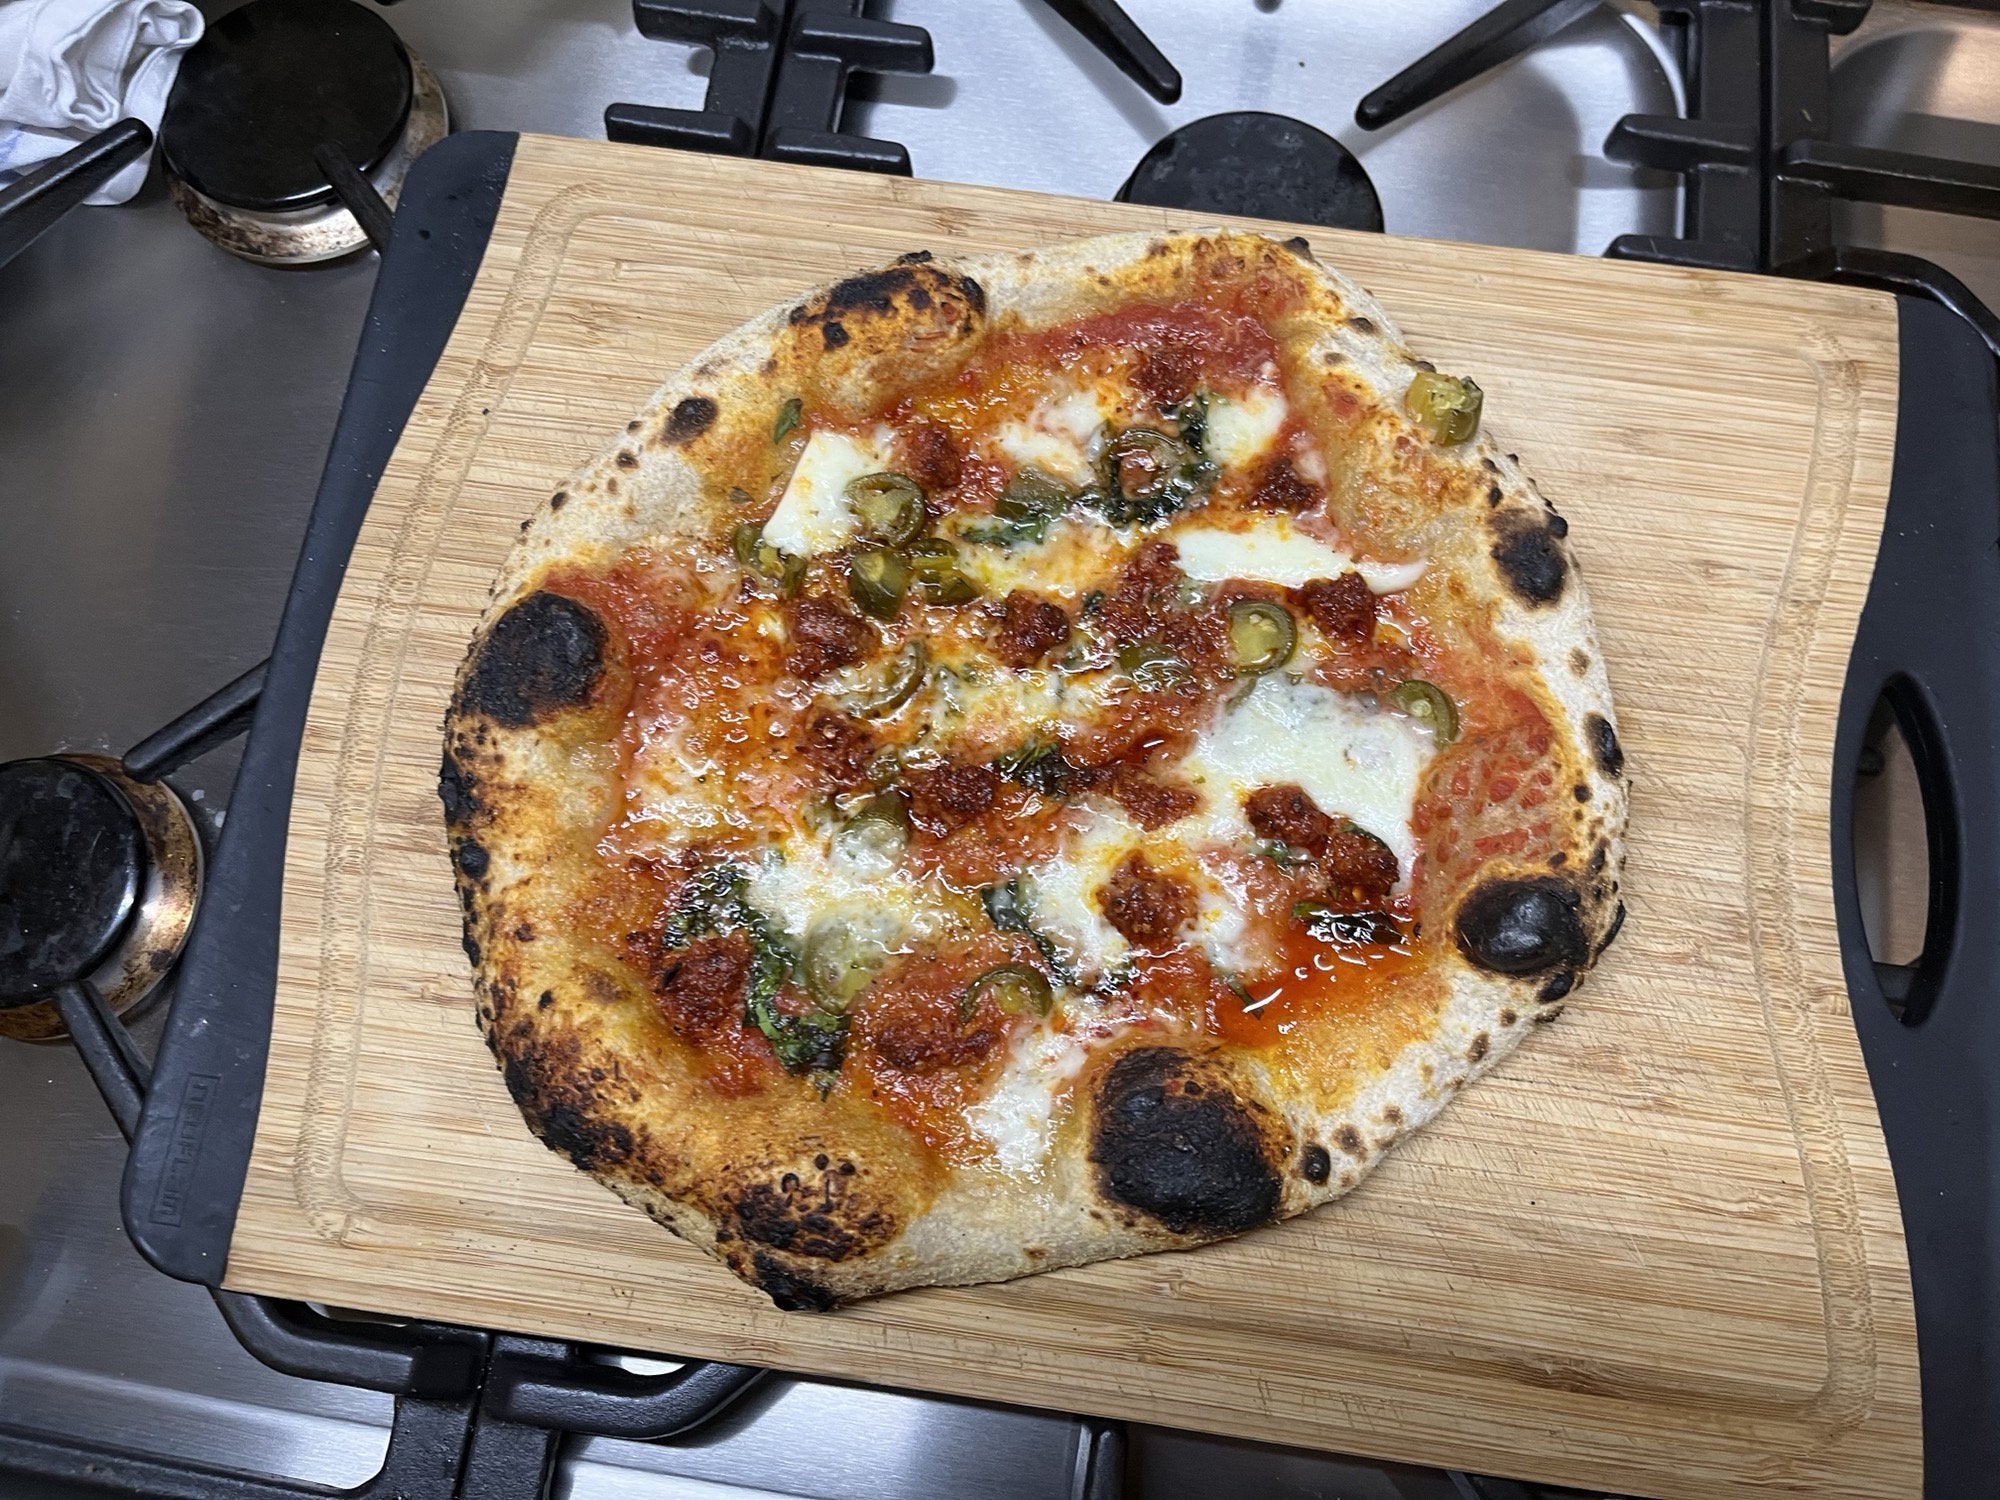 Ken Forkish’s sourdough pizza - Dining and Cooking